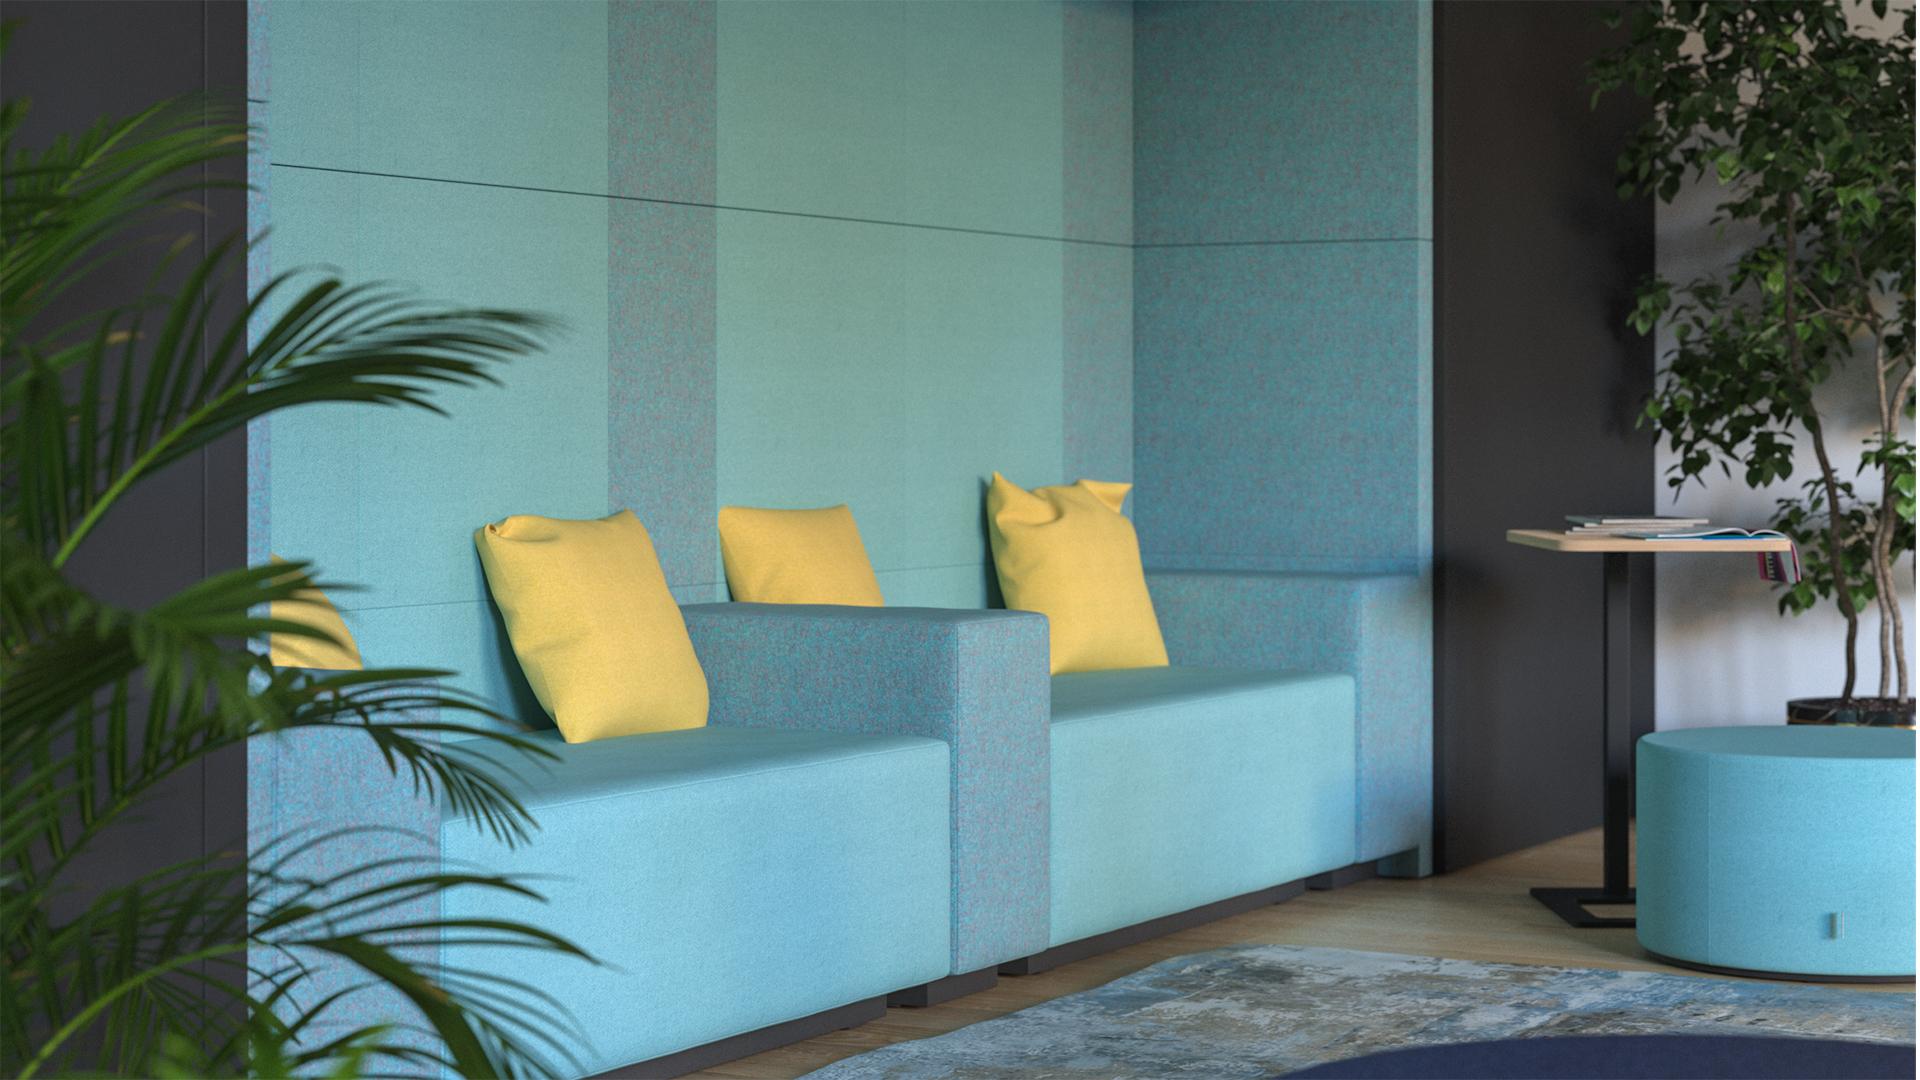 Modus Light panels with Jazz Chill Out modular soft seating creates comfortable and colourful breakout areas